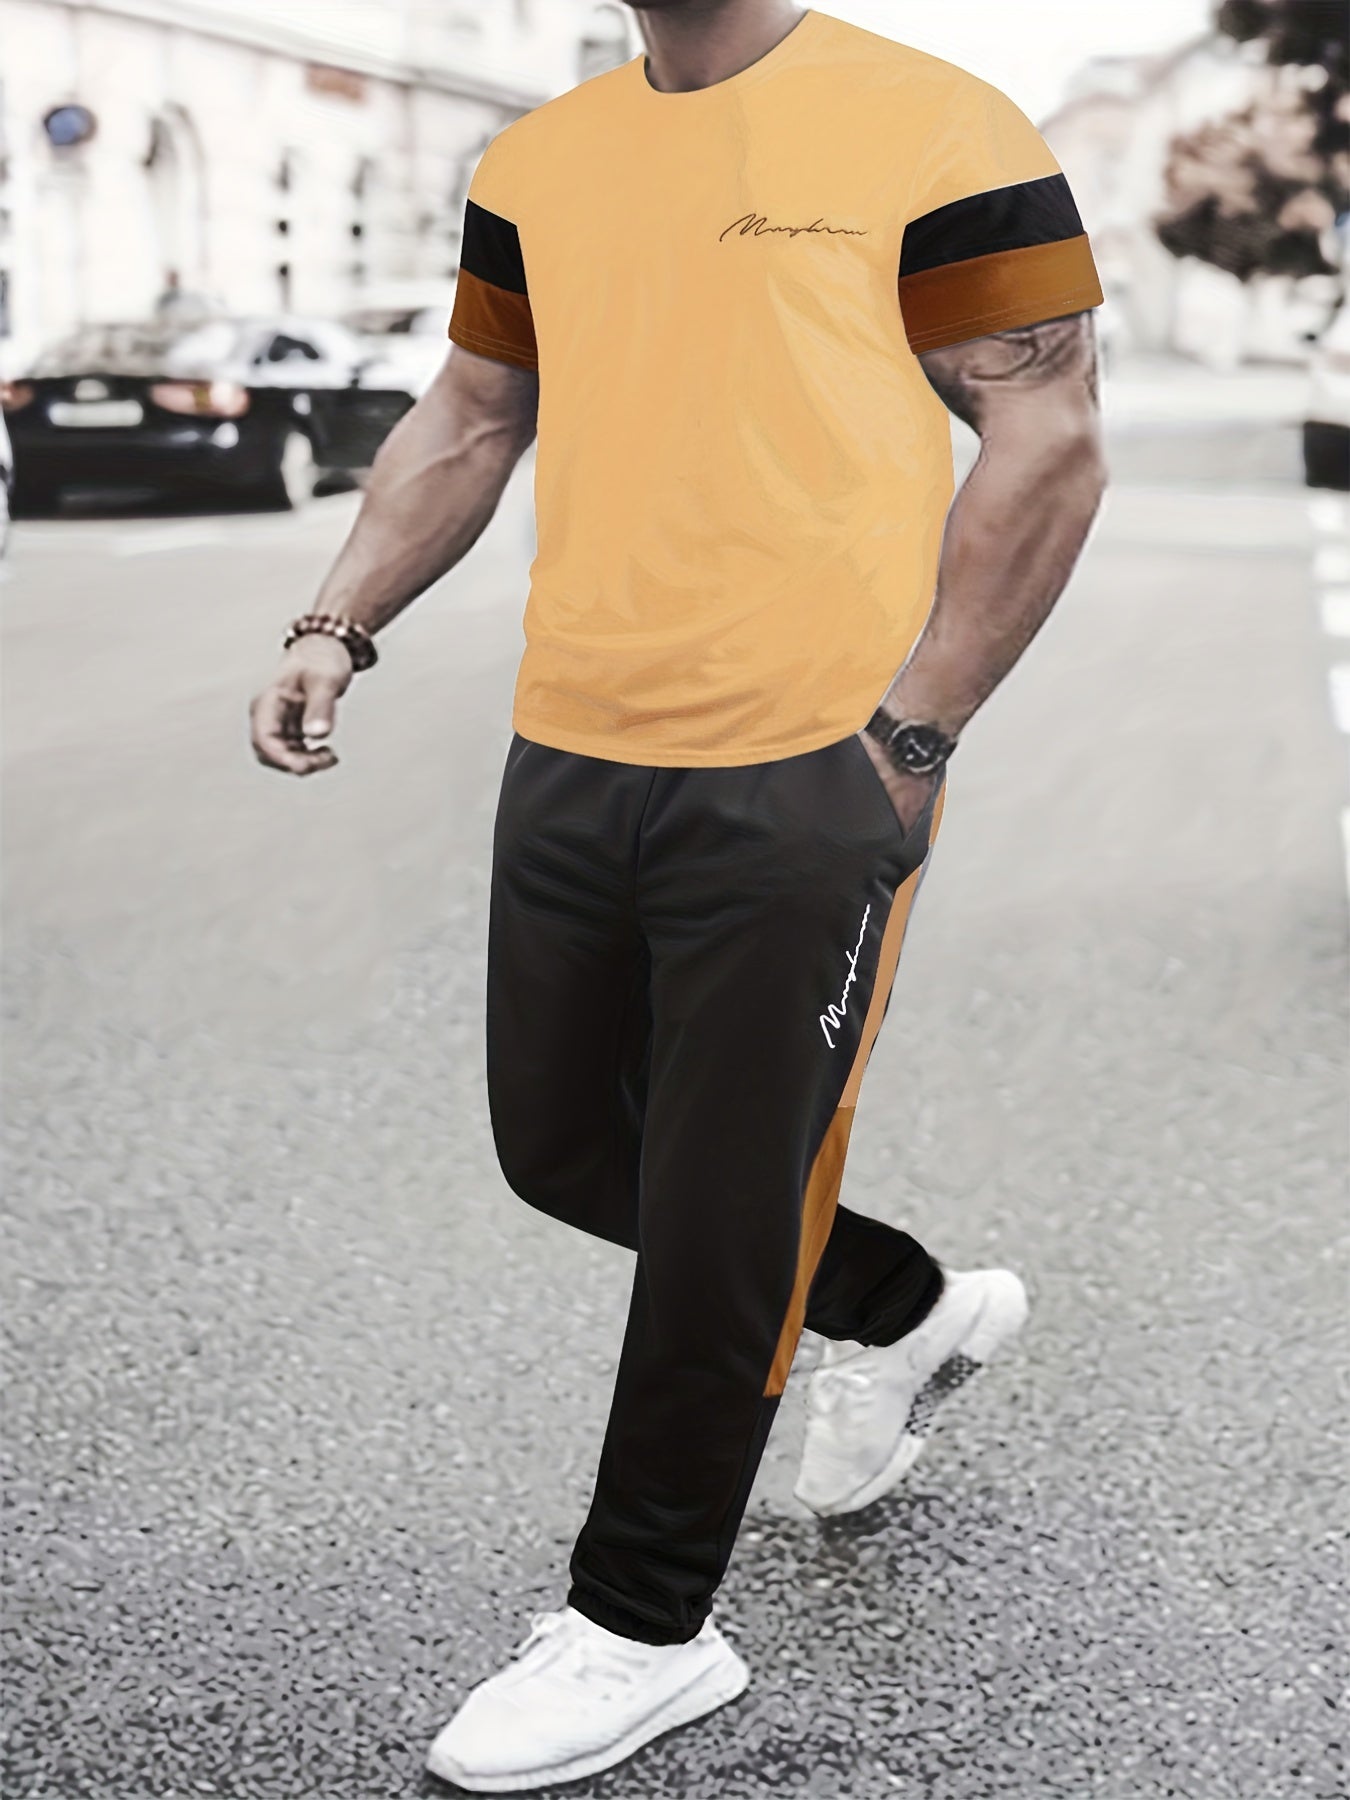 Men's Colorblock Casual T-shirt Outfit Set, 2 Pieces Round Neck Short Sleeve Tees And Drawstring Long Pants